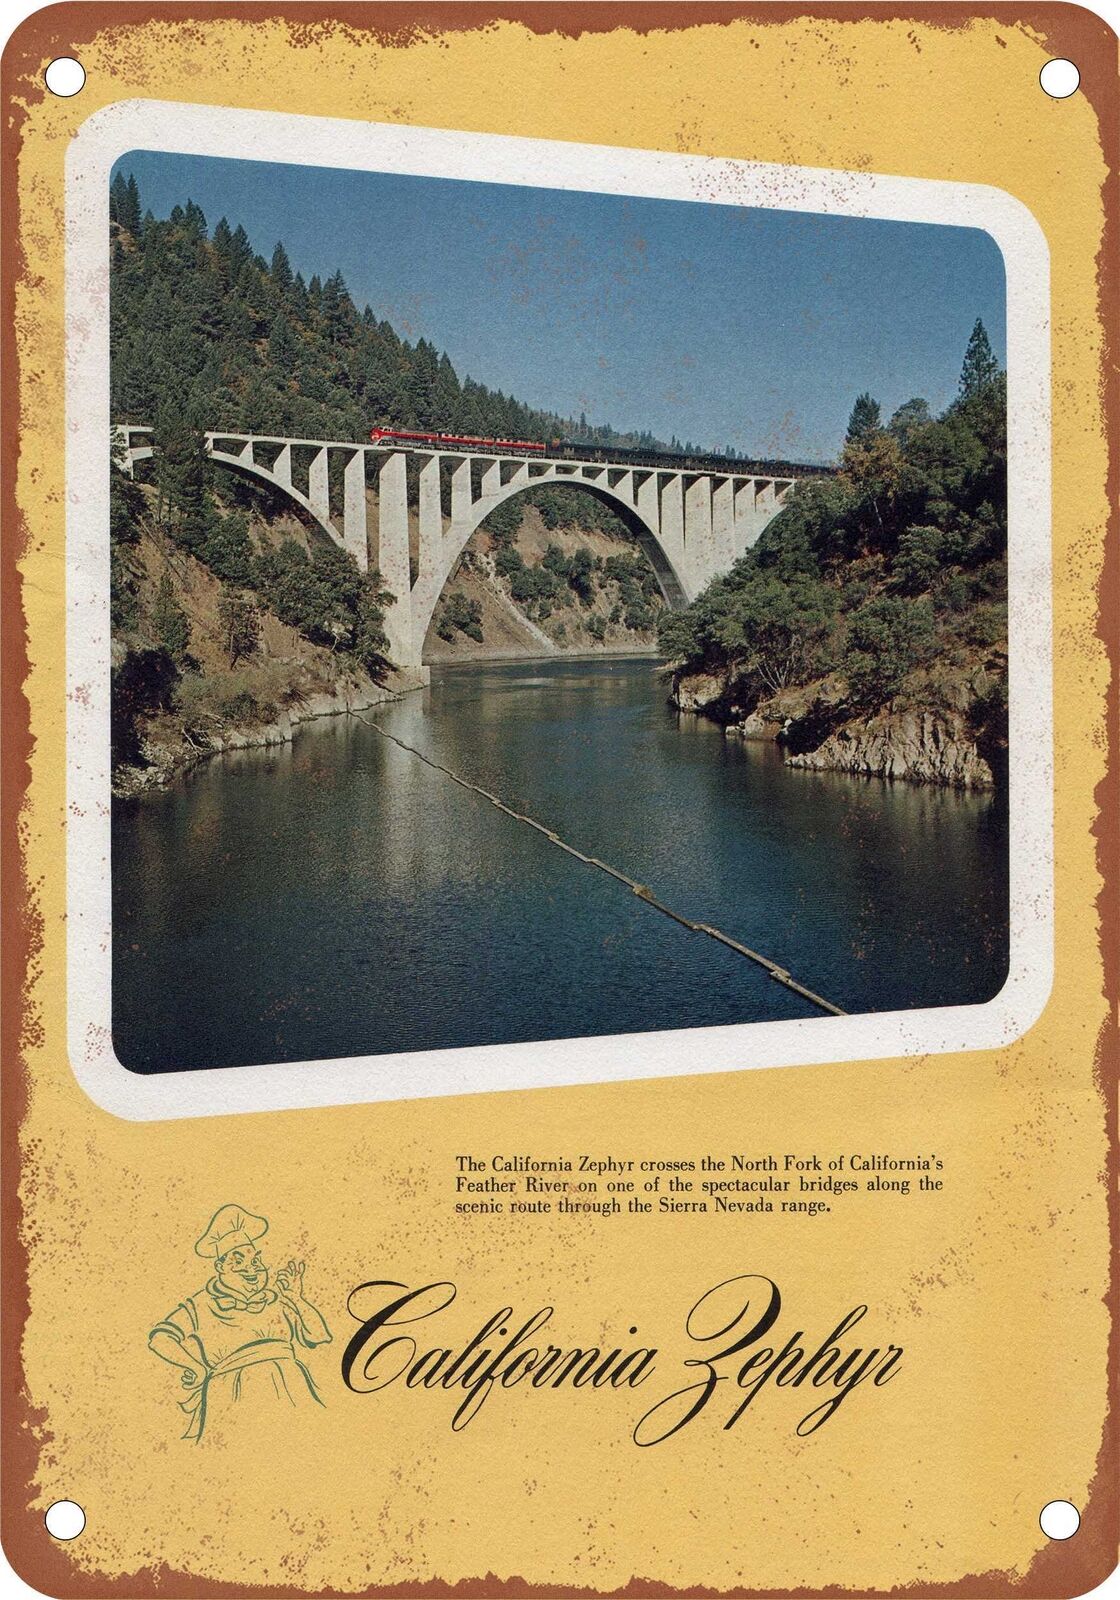 METAL SIGN - 1969 California Zephyr Feather River Route - Vintage Rusty Look